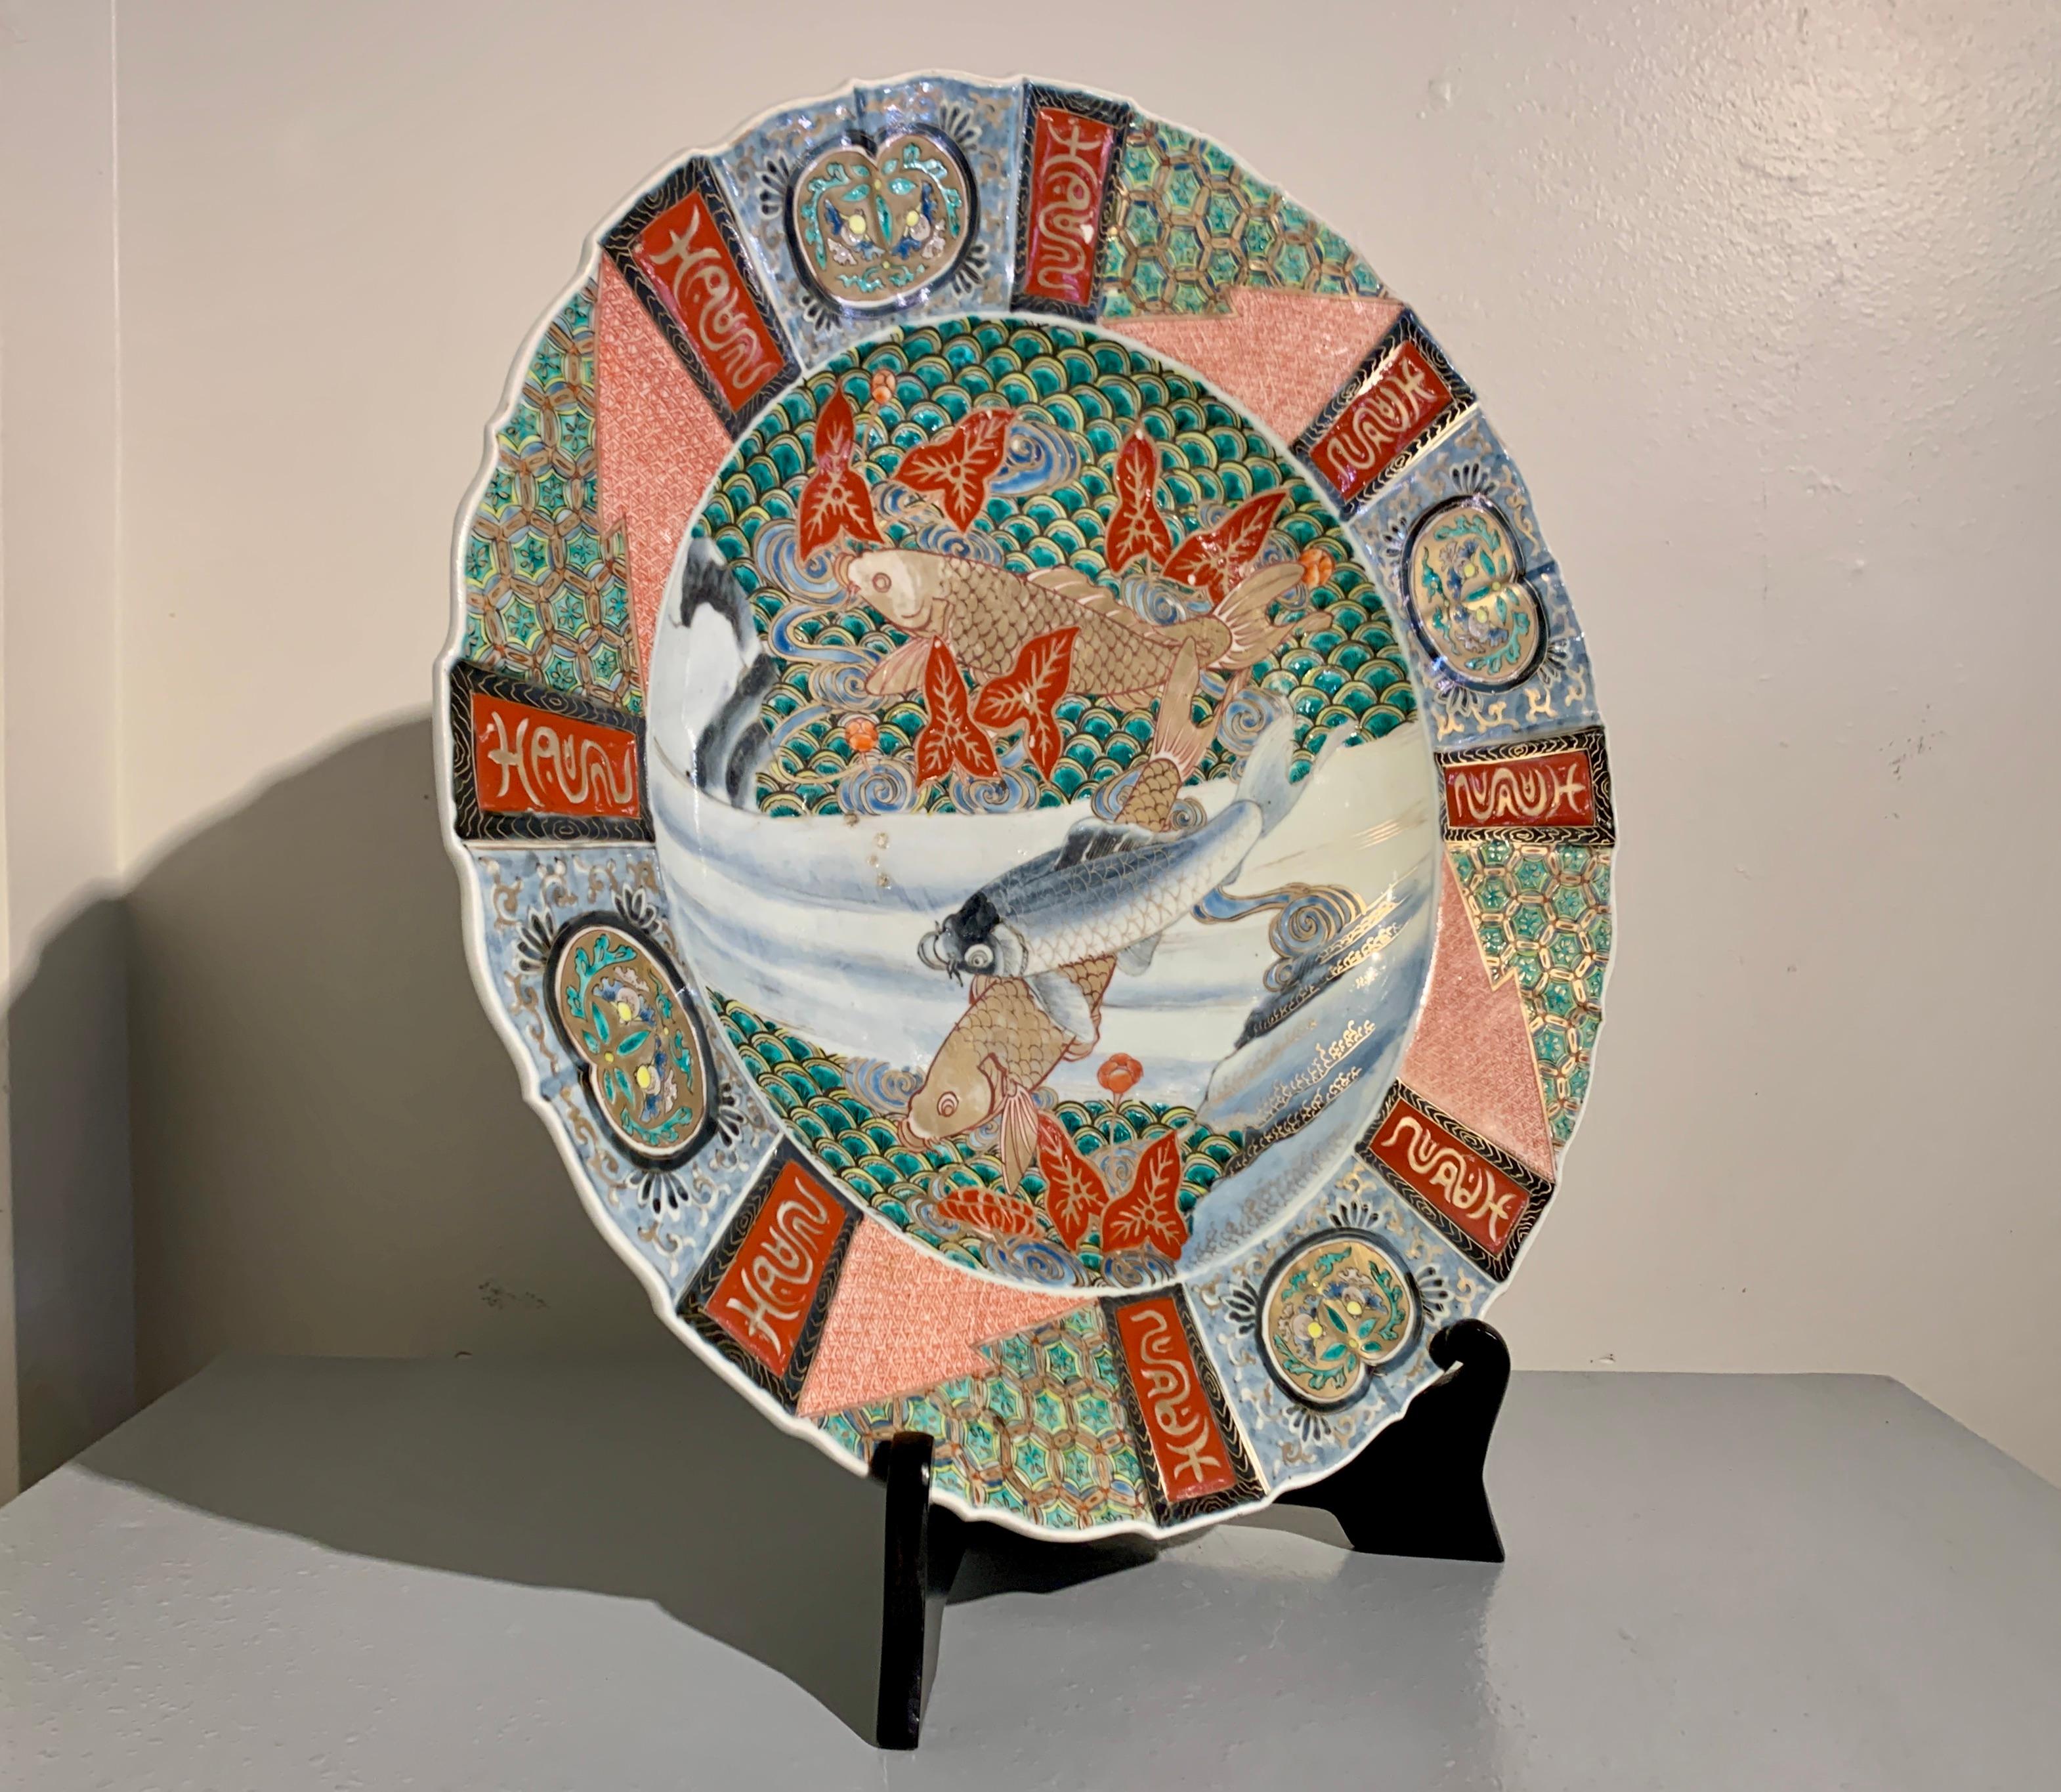 A boldly decorated large Japanese Imari porcelain scalloped edge charger with koi fish, Meiji Period, late 19th century, Japan.

The large, shallow charger features a central design of three carp, koi, two in gilt, one in underglaze blue with gilt